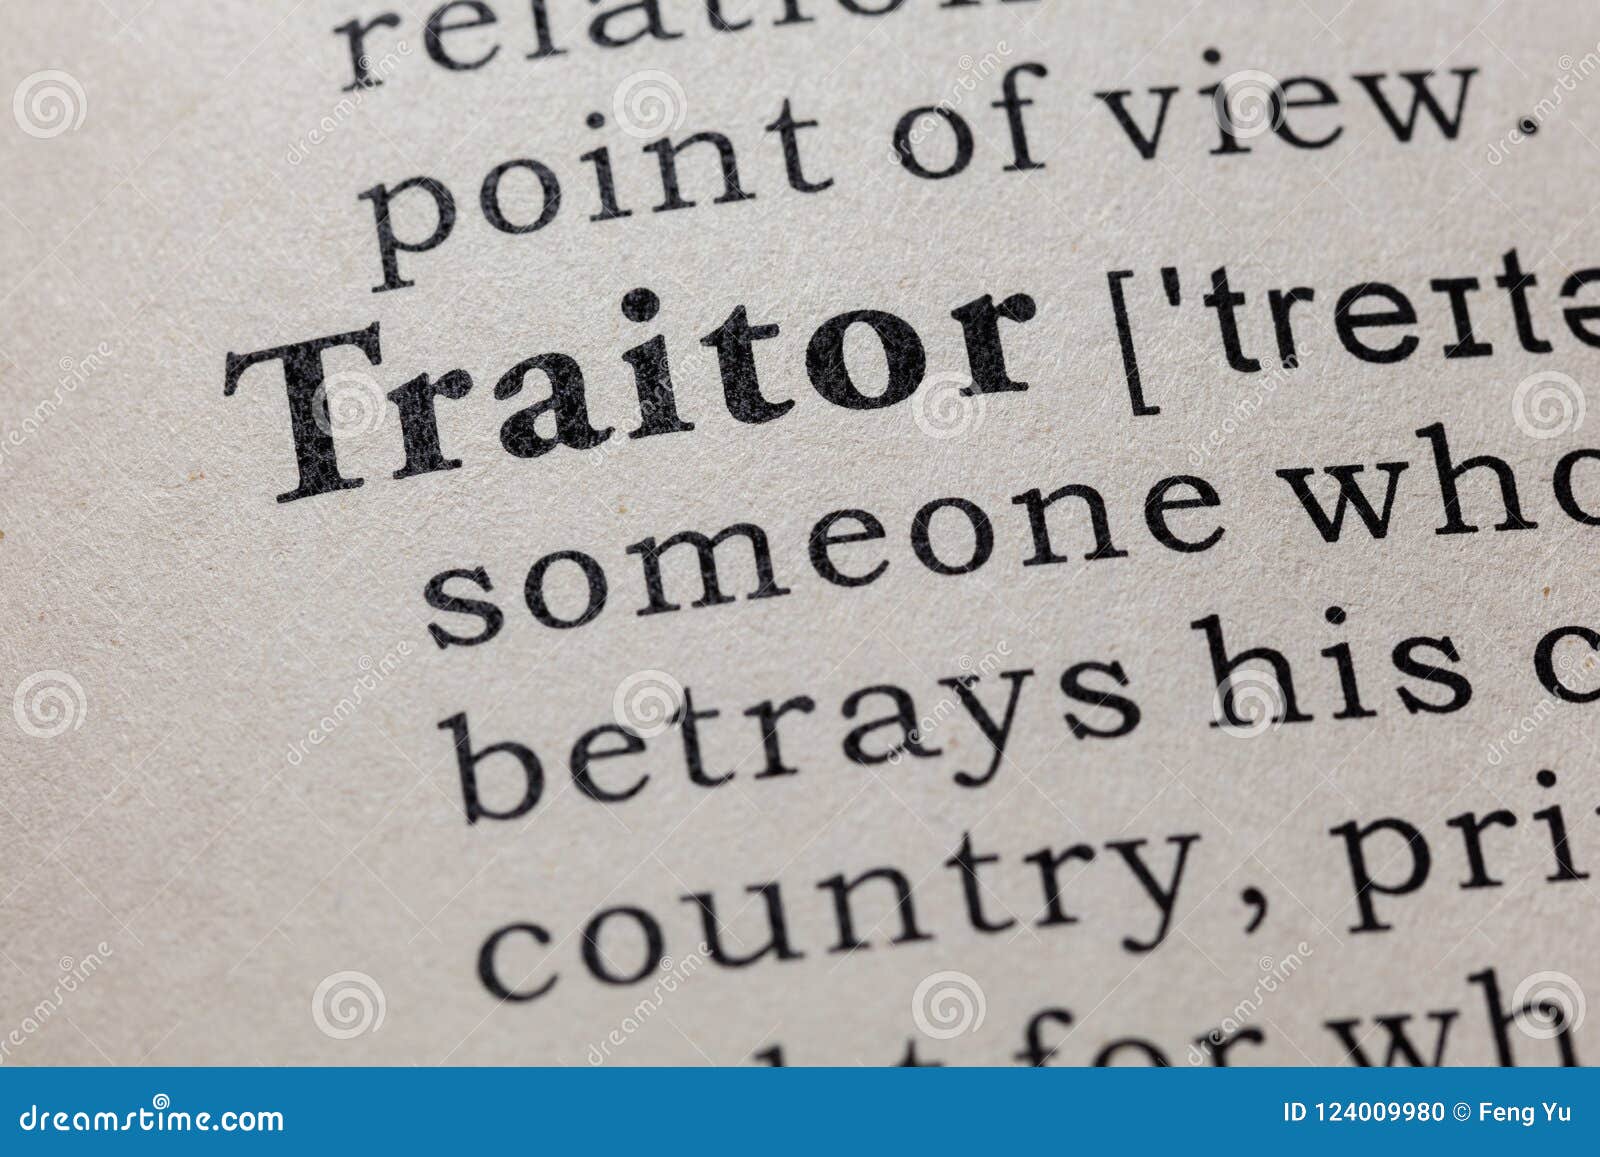 Traitor  Meaning of traitor 